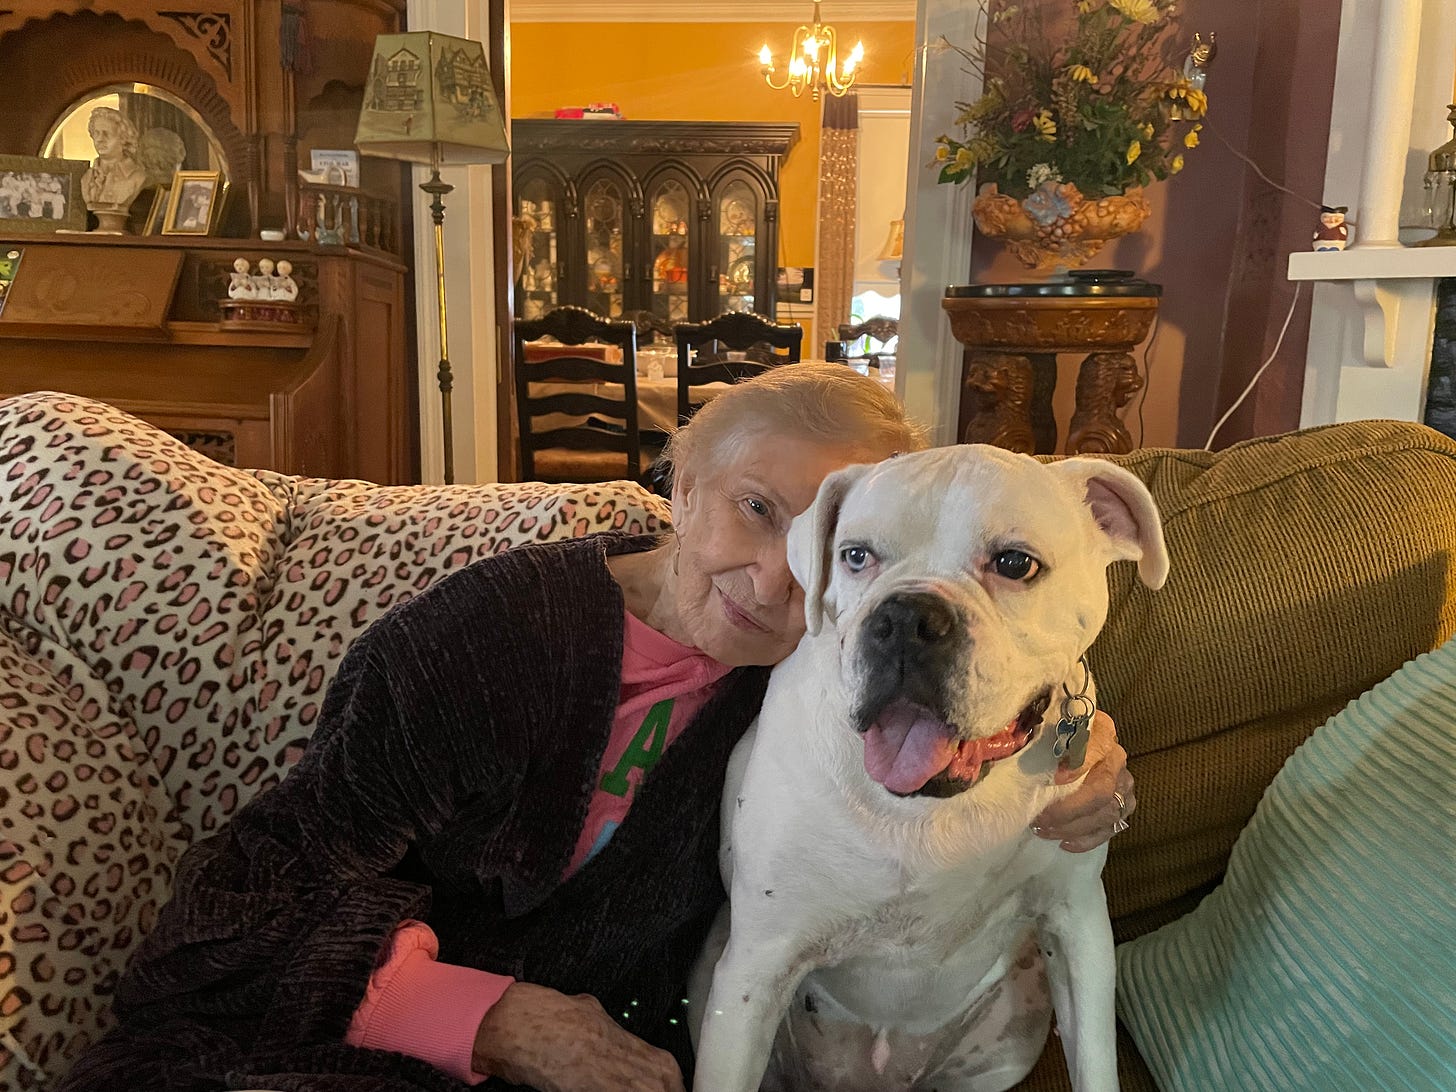 A woman and a white dog on a couch.